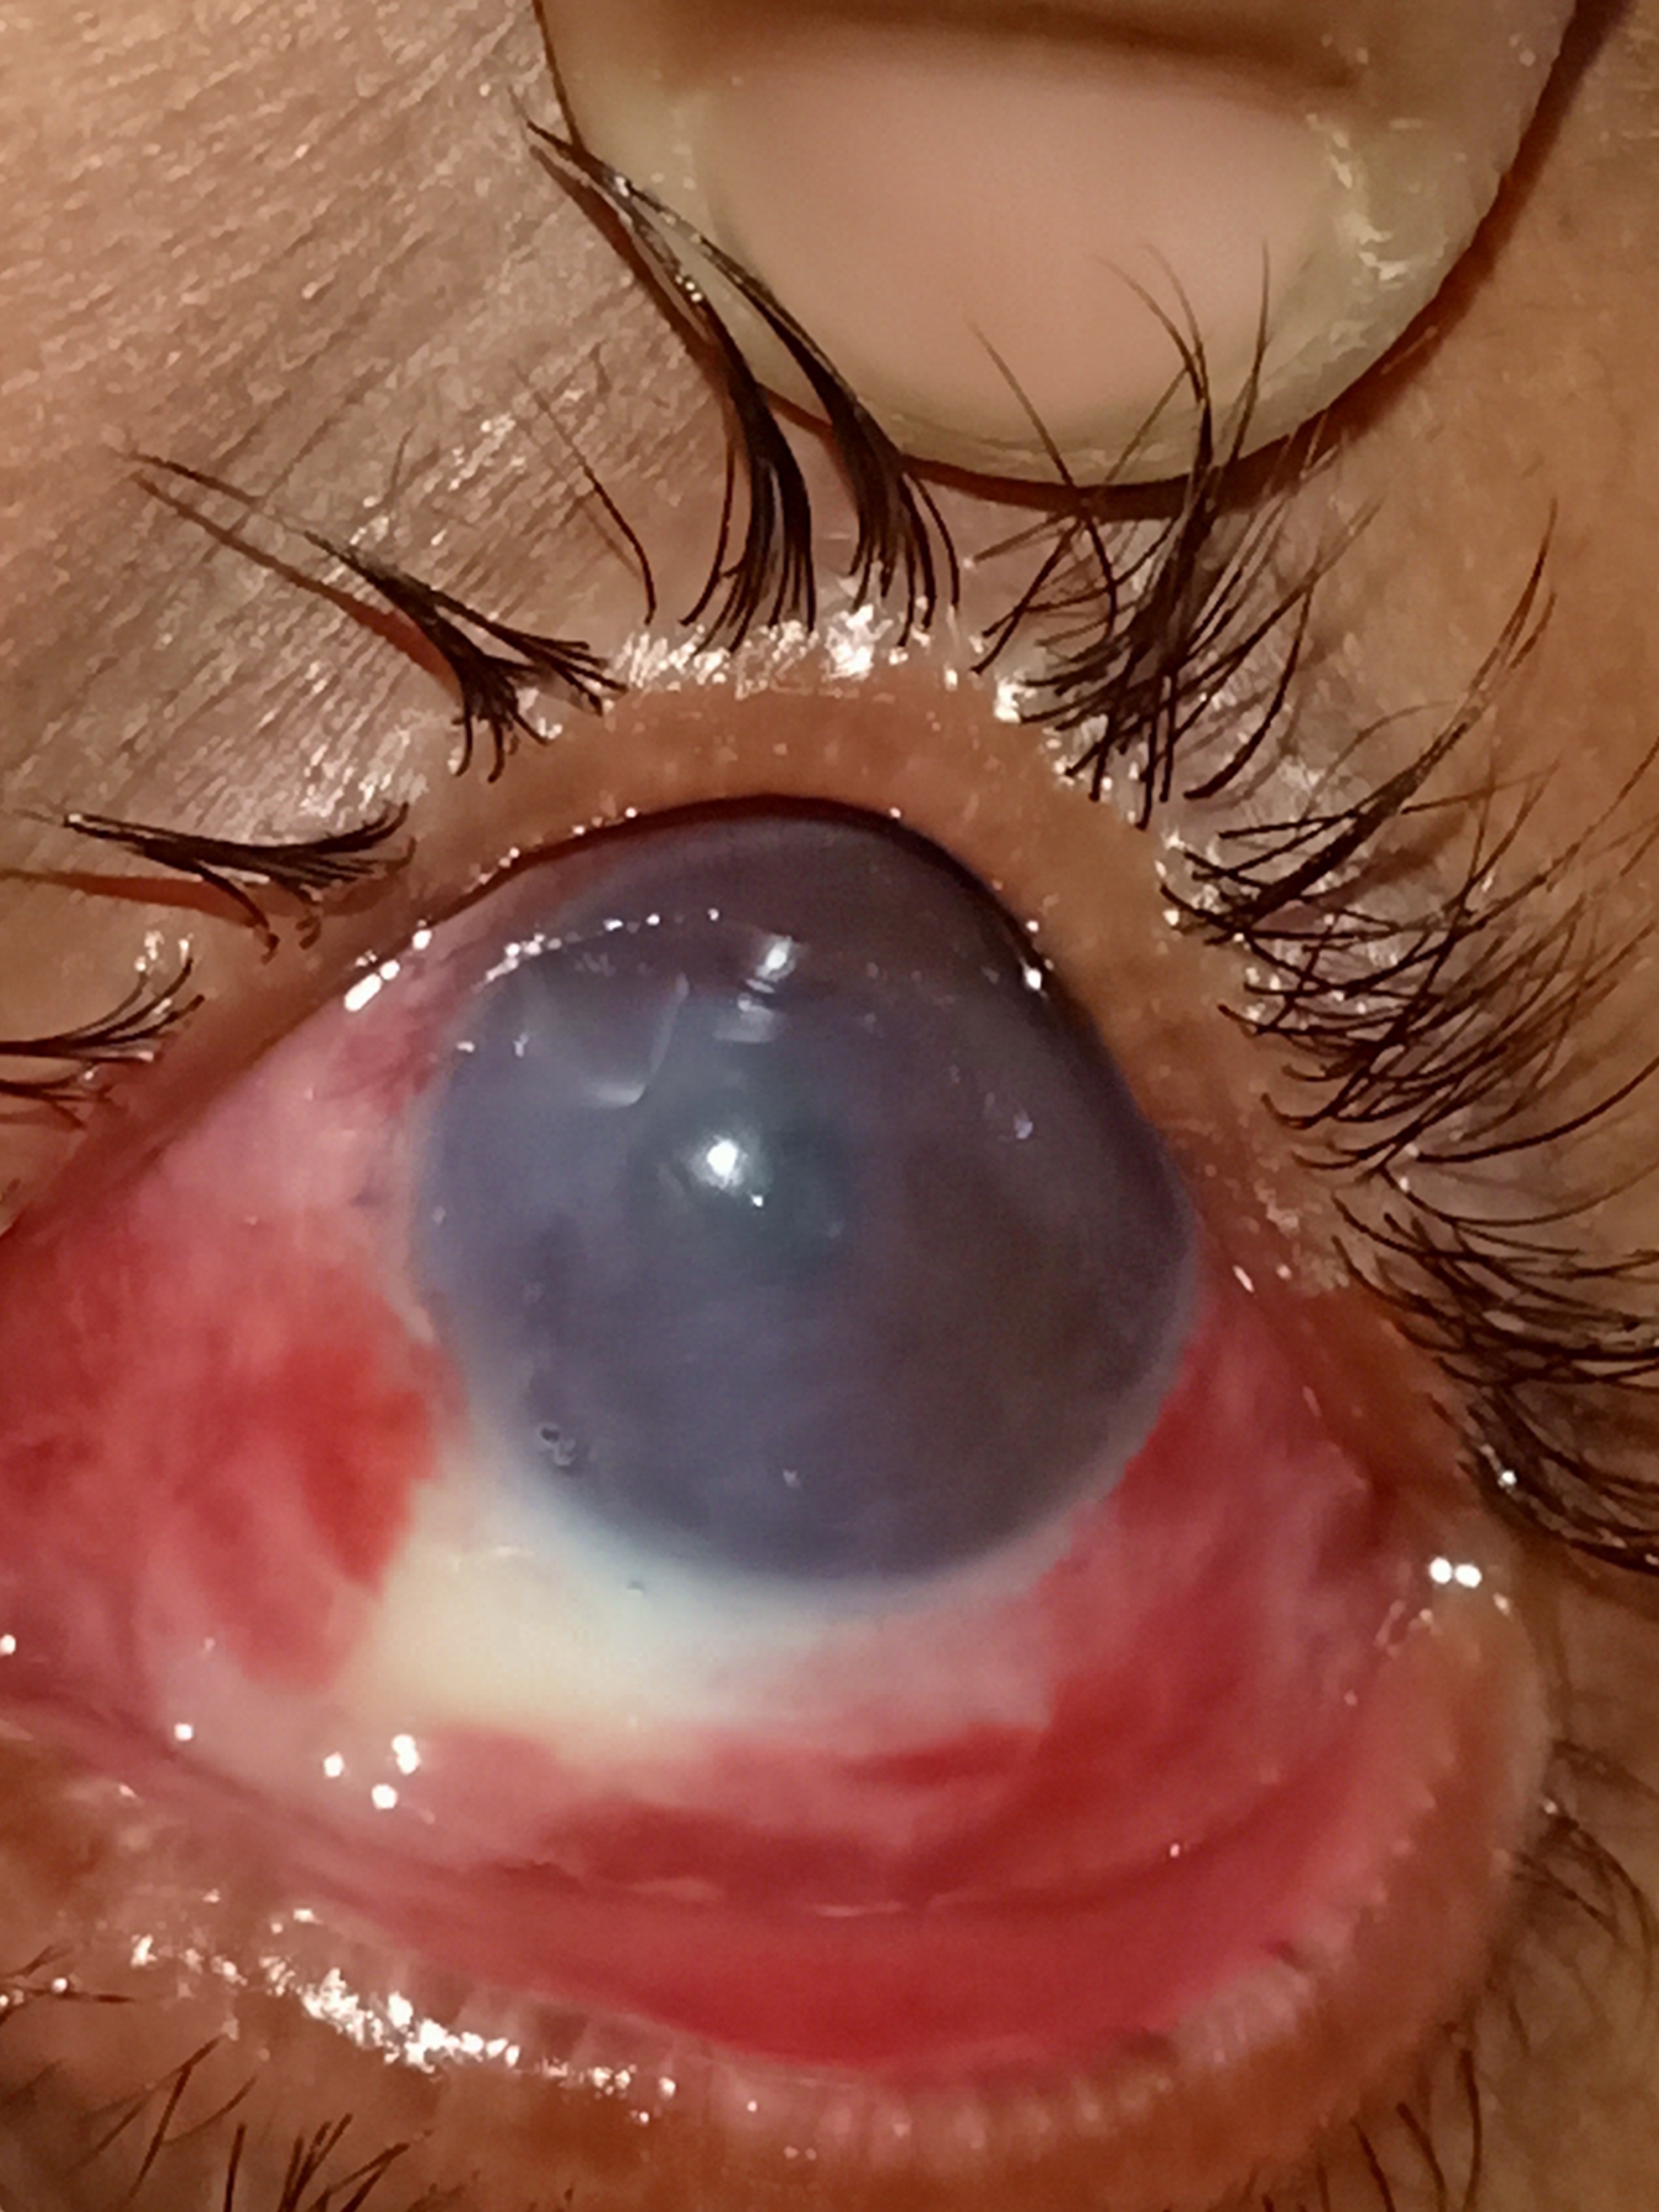 Digital slit lamp image of the patient with ocular chemical burn with lime depicting matted lashes, diffuse conjunctival congestion, blanching, stromal edema and inferior limbal stem cell deficiency